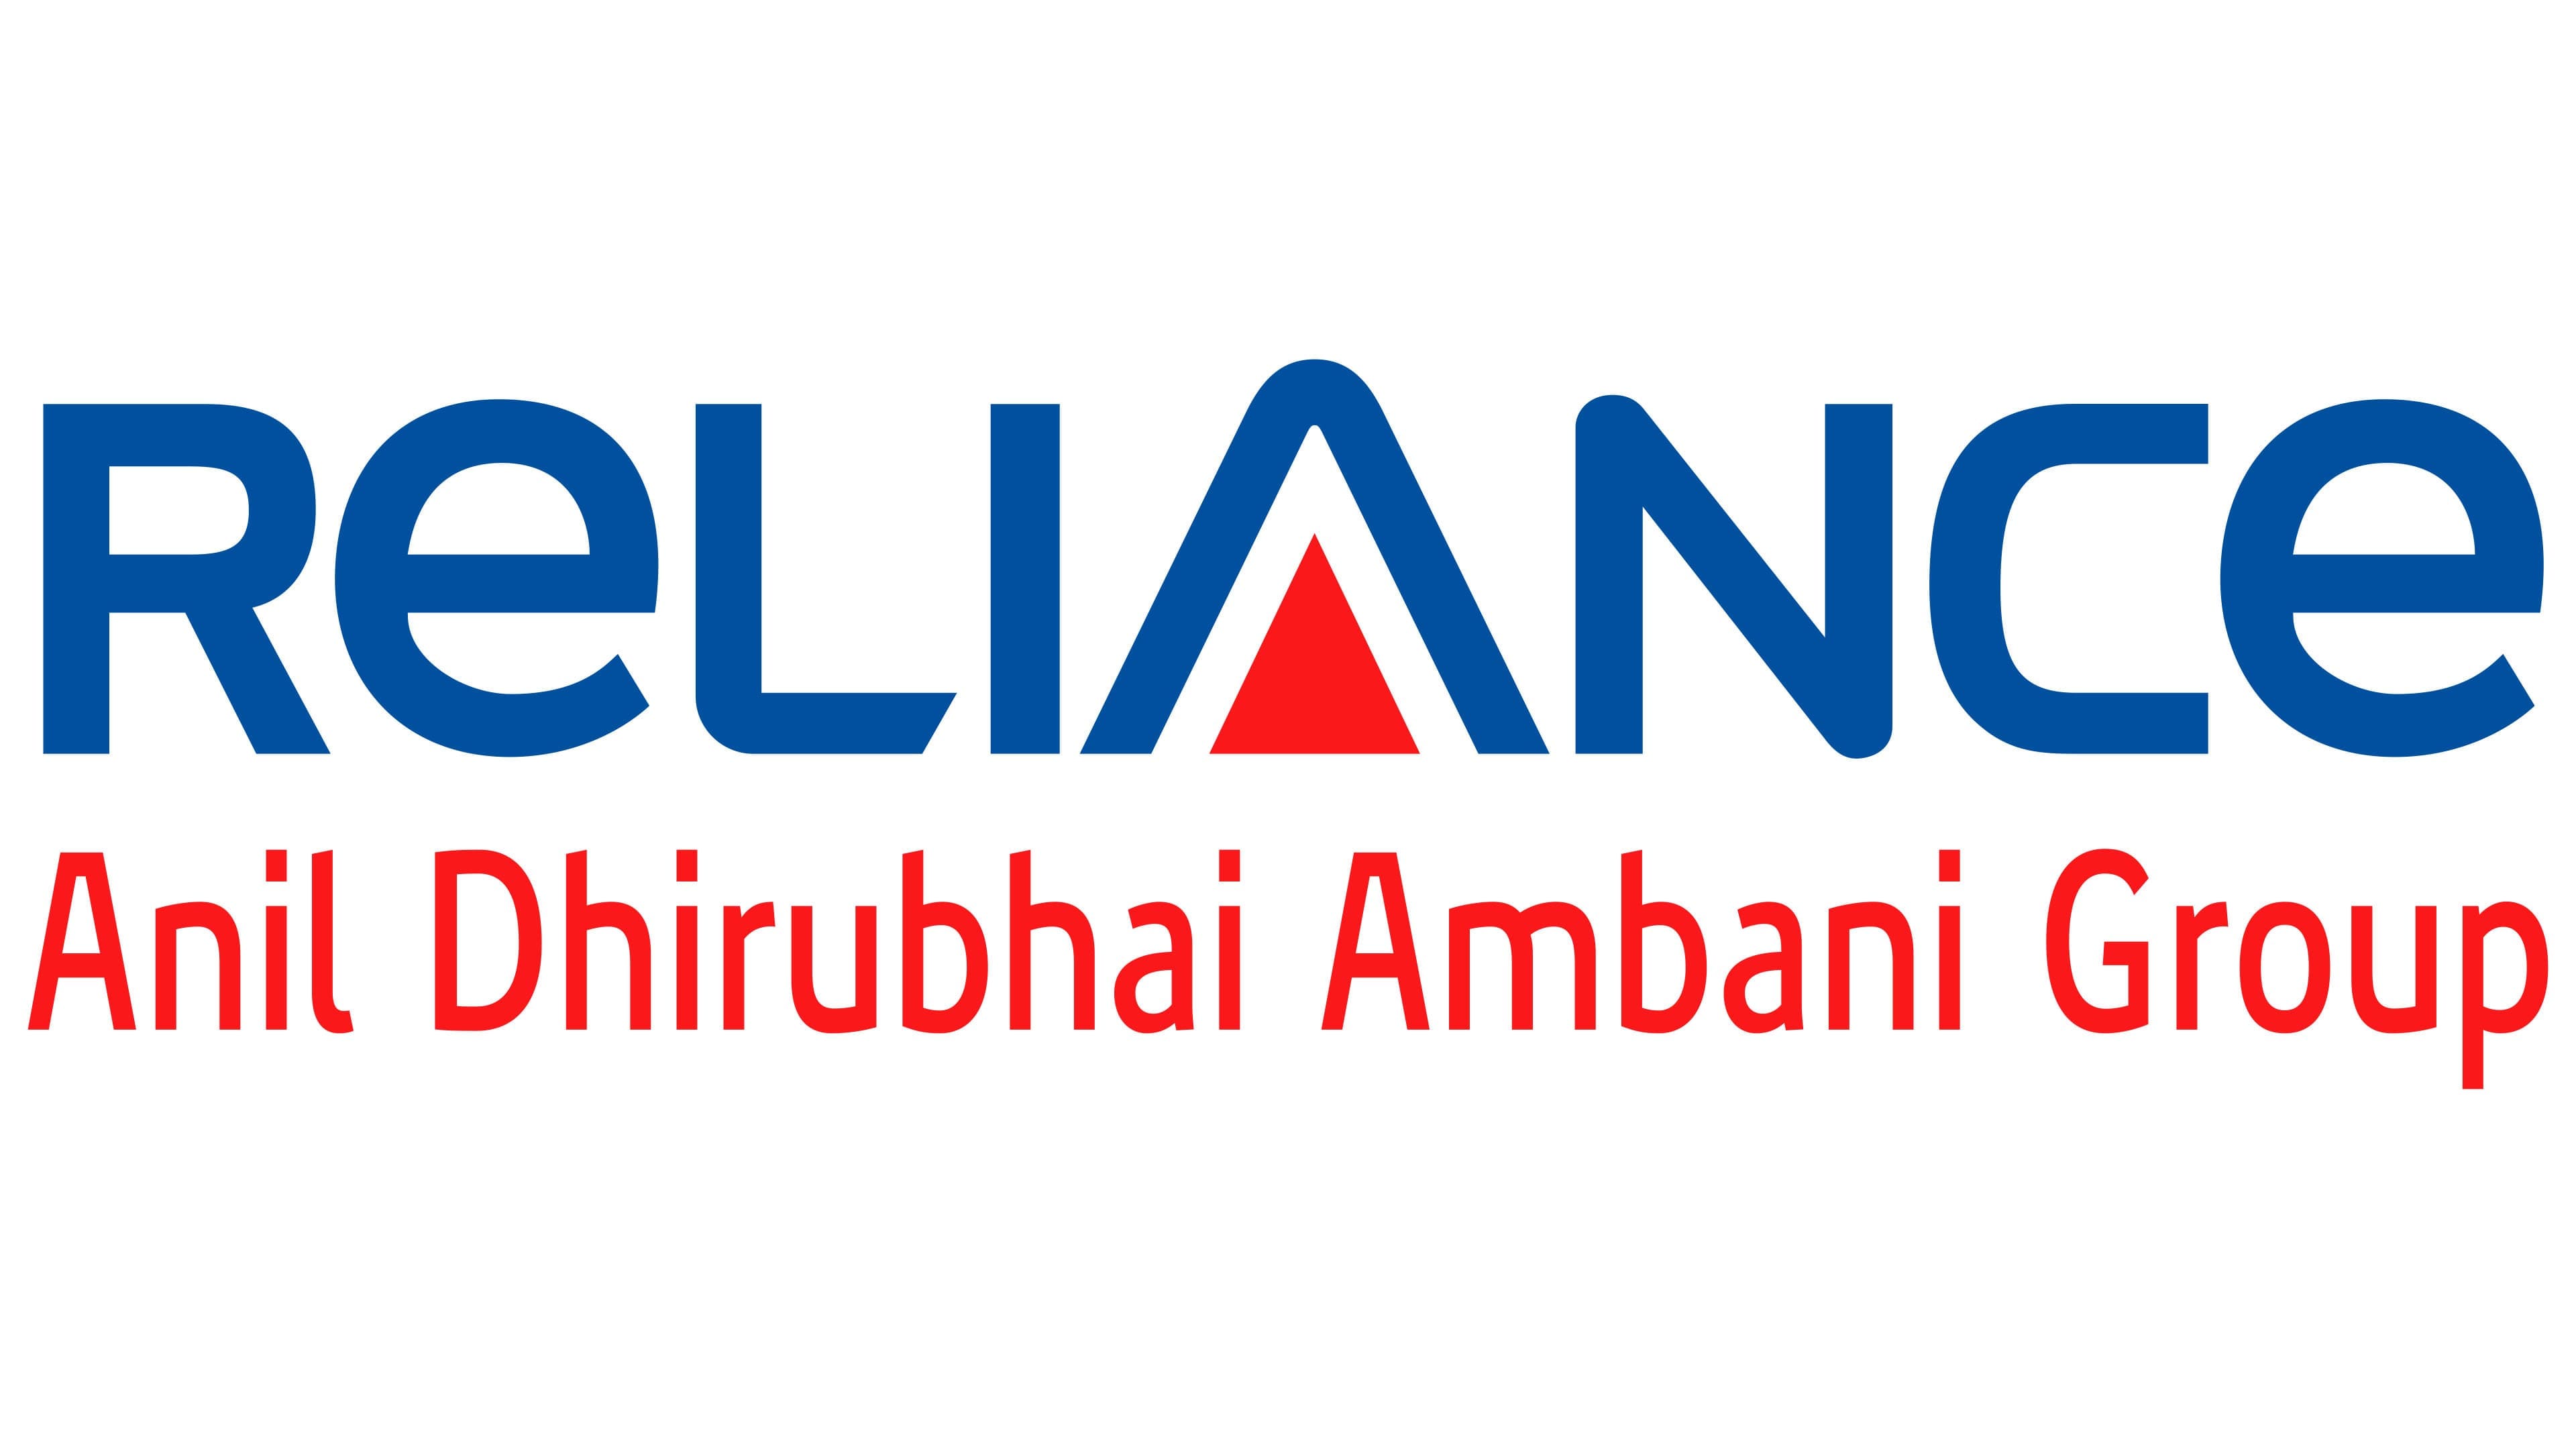 reliance-logo-symbol-meaning-history-png-brand